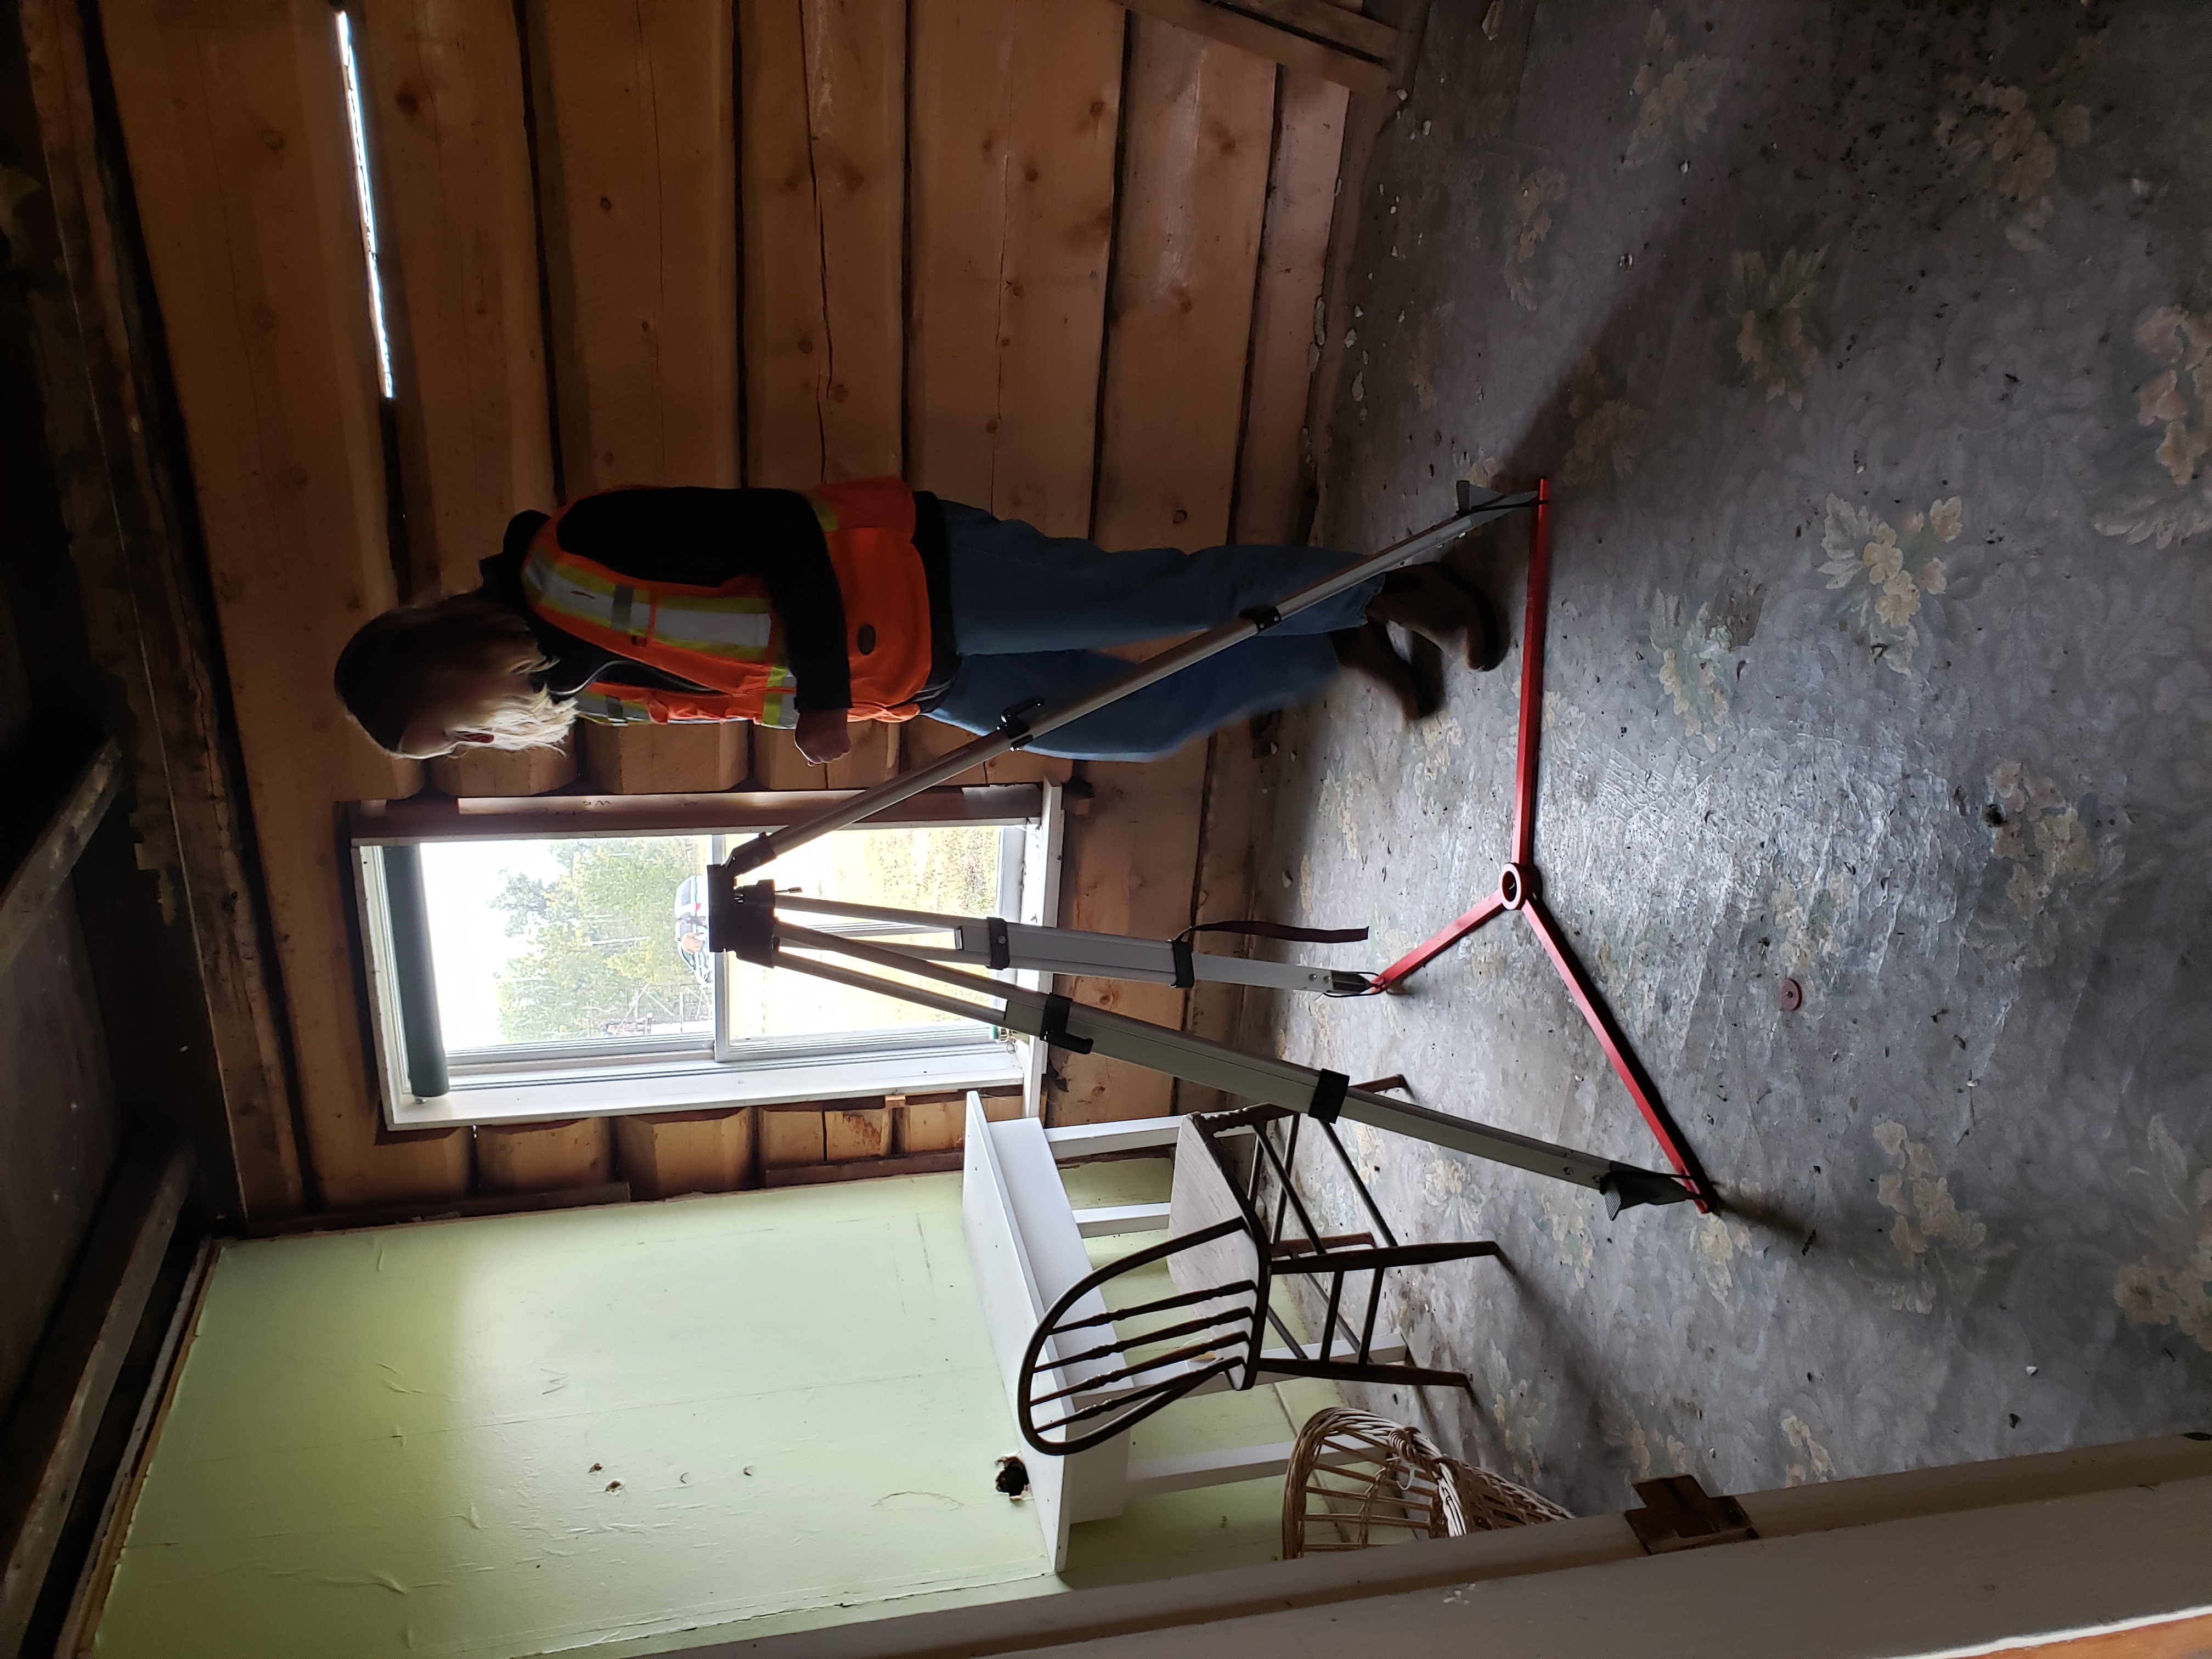 Setting up the Z+F 5016 in the interior of the Foreman's House by Kate Pexman of the Capture2Preserve team, 2020-09-14.